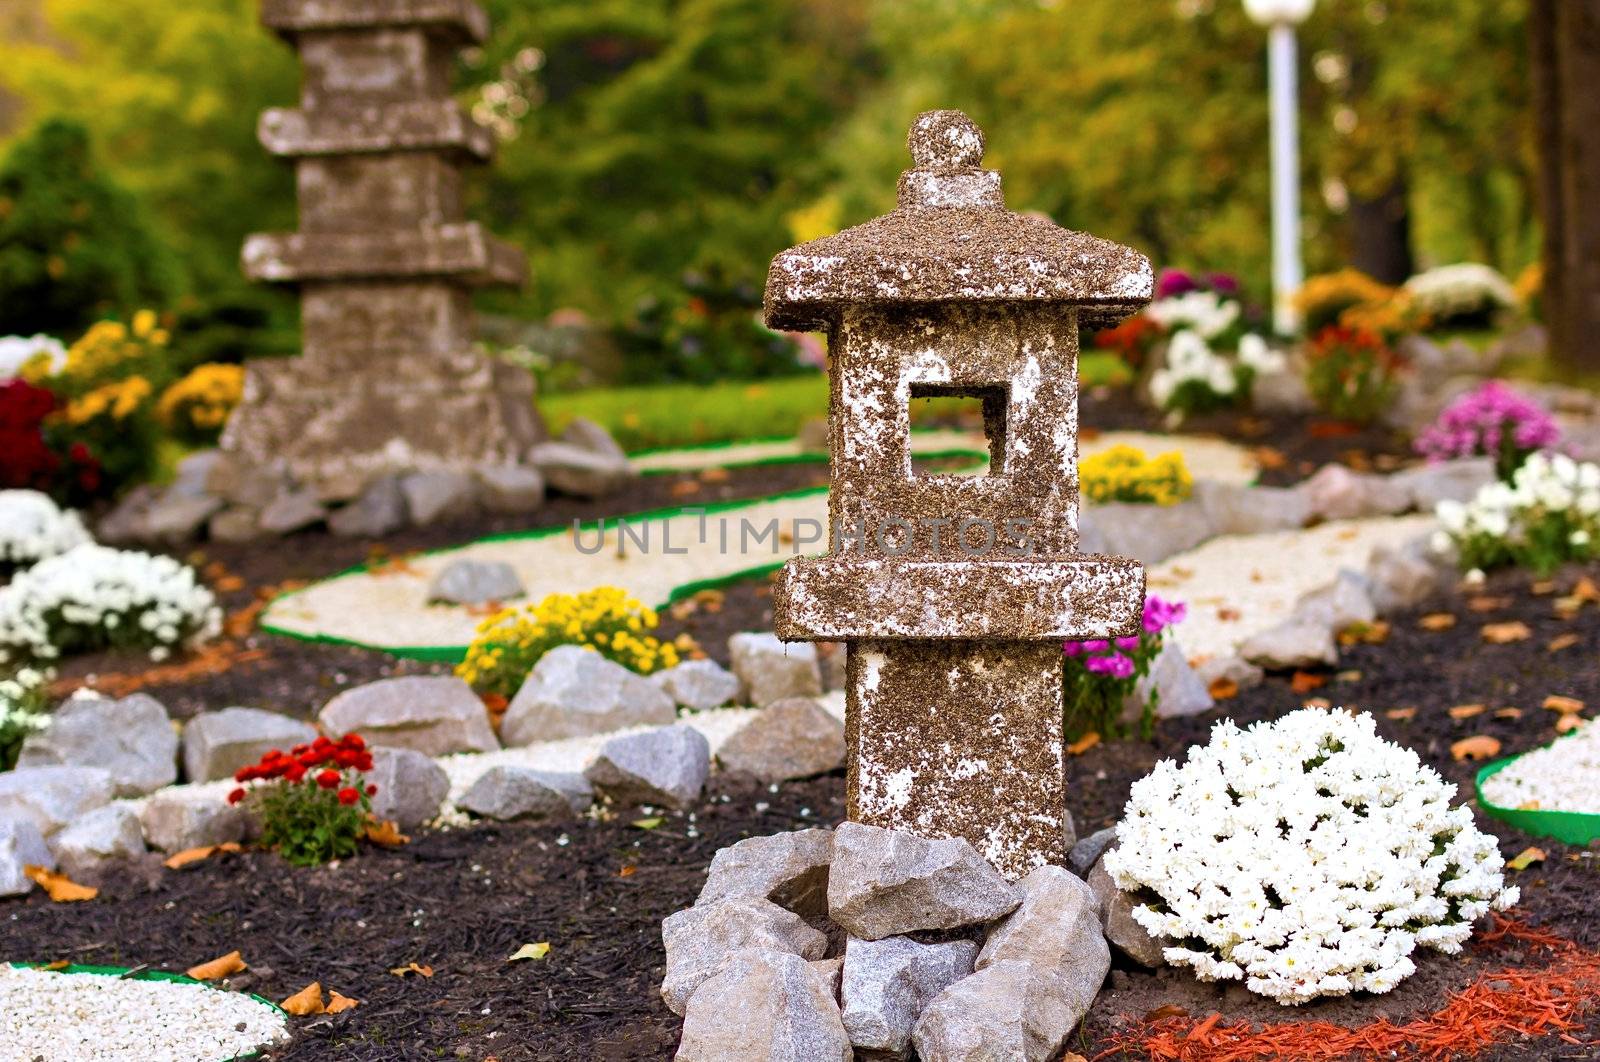 Park in Japanese style with stone objects and flowers.